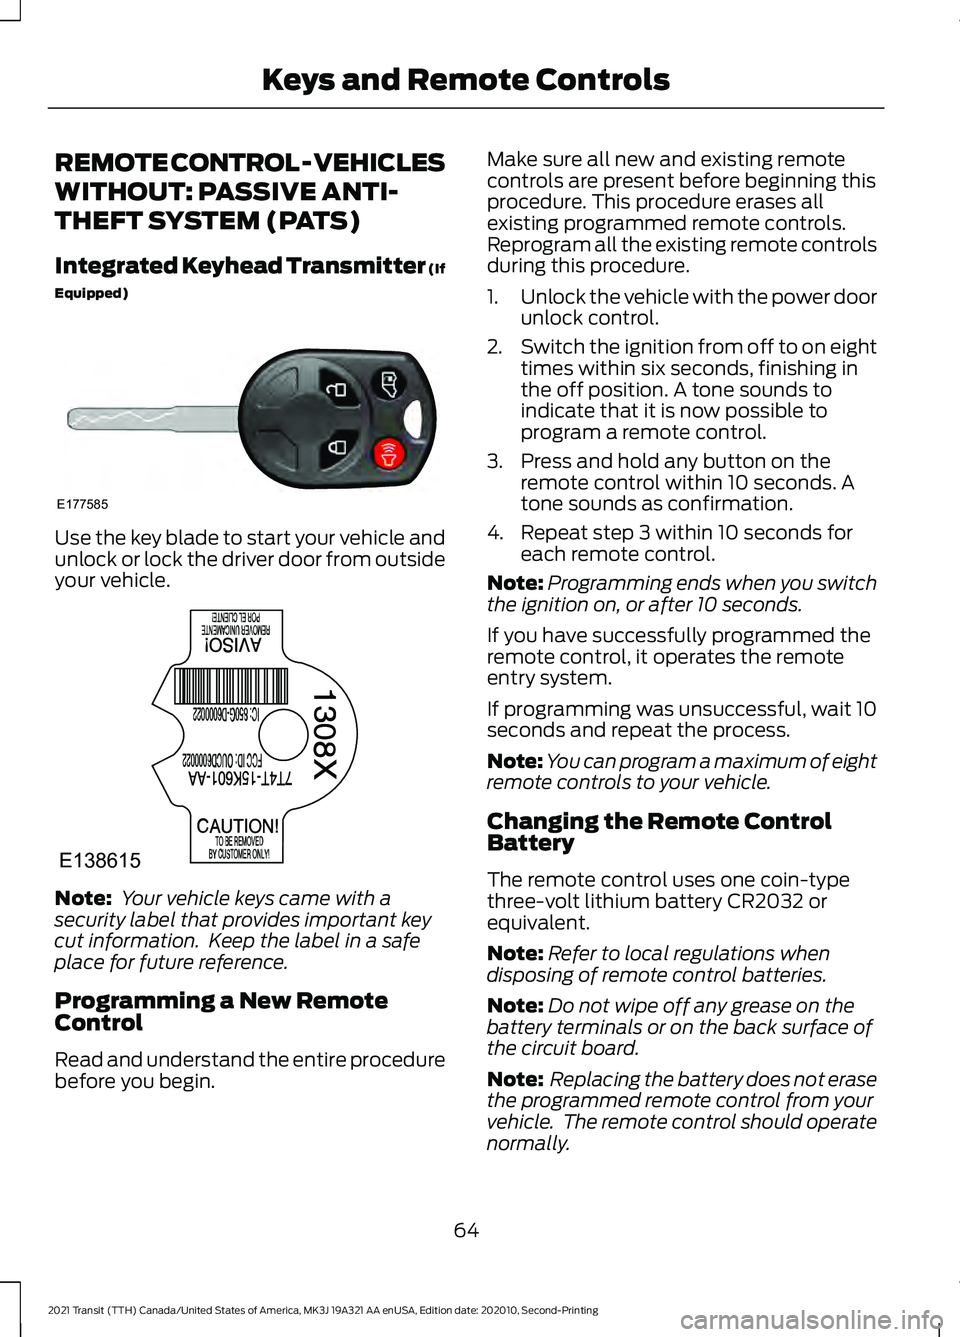 FORD TRANSIT 2021 User Guide REMOTE CONTROL - VEHICLES
WITHOUT: PASSIVE ANTI-
THEFT SYSTEM (PATS)
Integrated Keyhead Transmitter (If
Equipped)
Use the key blade to start your vehicle and
unlock or lock the driver door from outsid